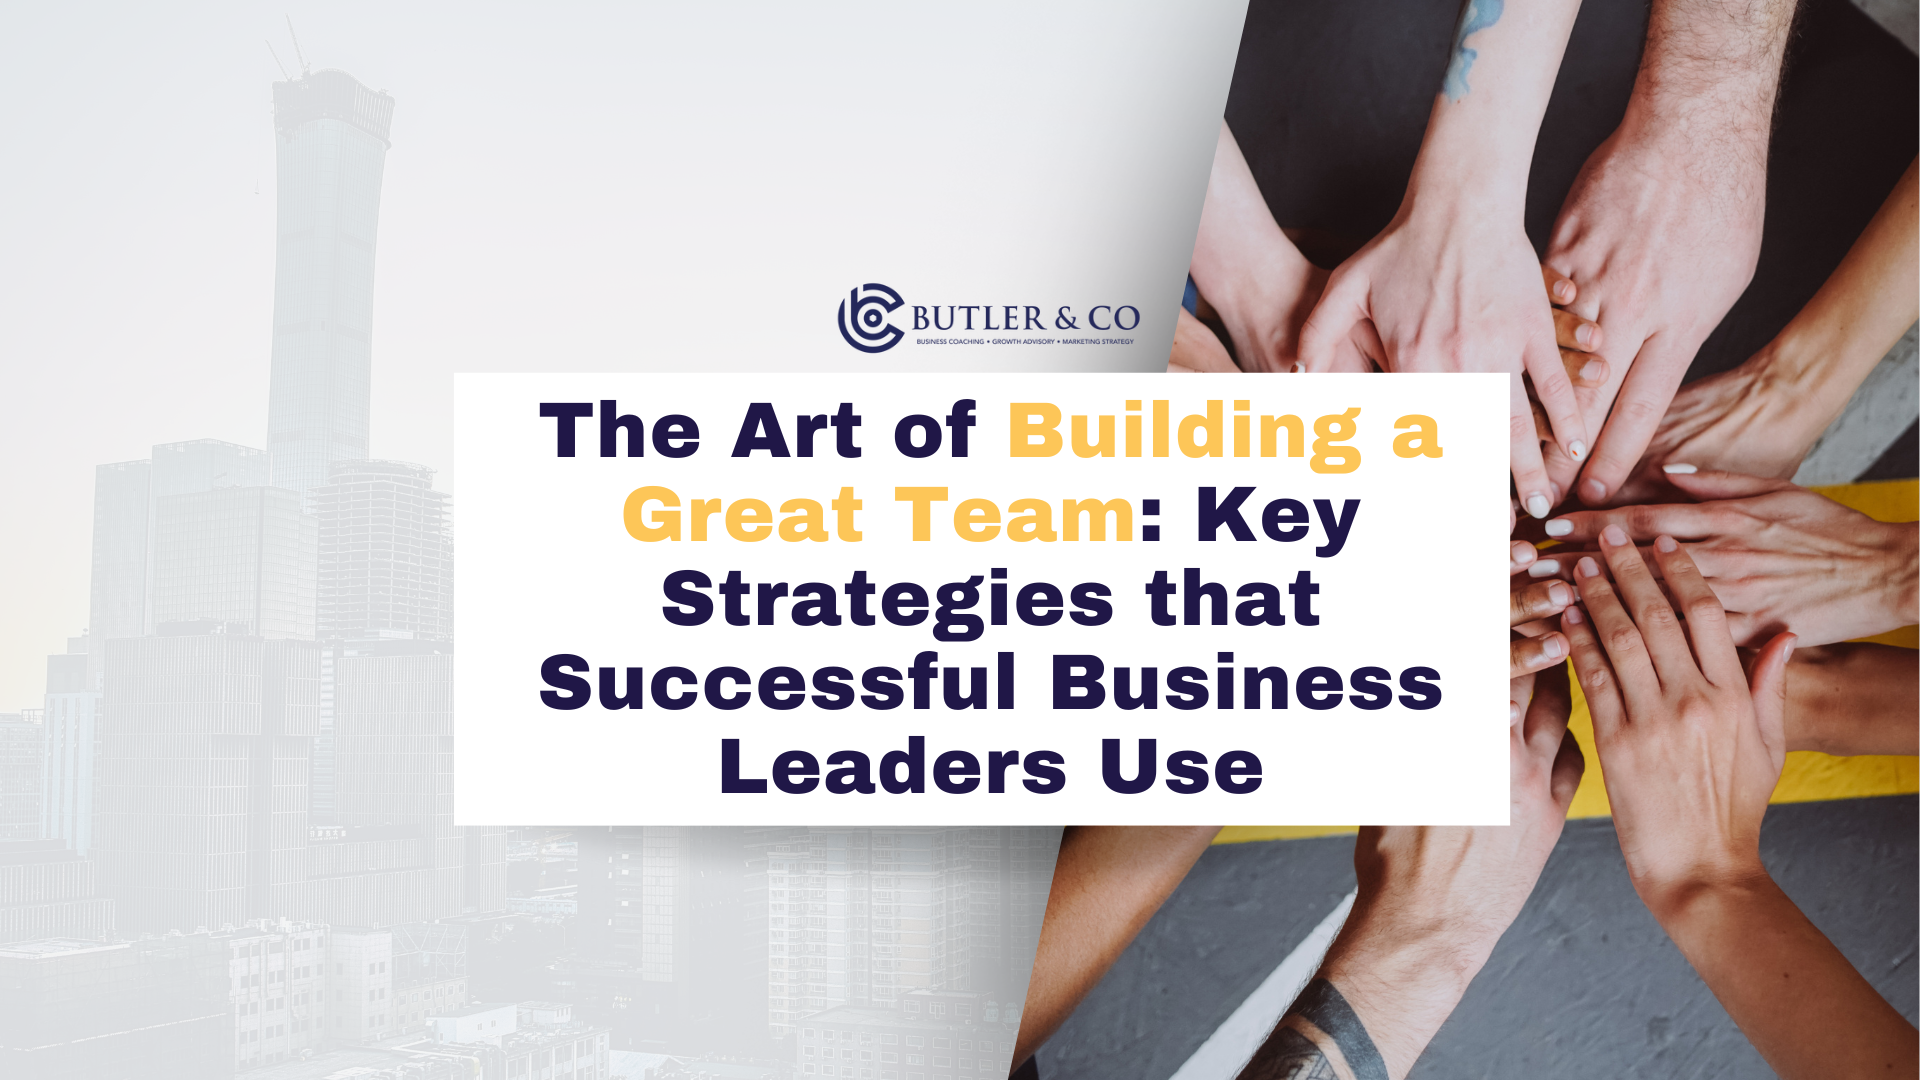 The Art of Building a Great Team: Key Strategies that Successful Business Leaders Use